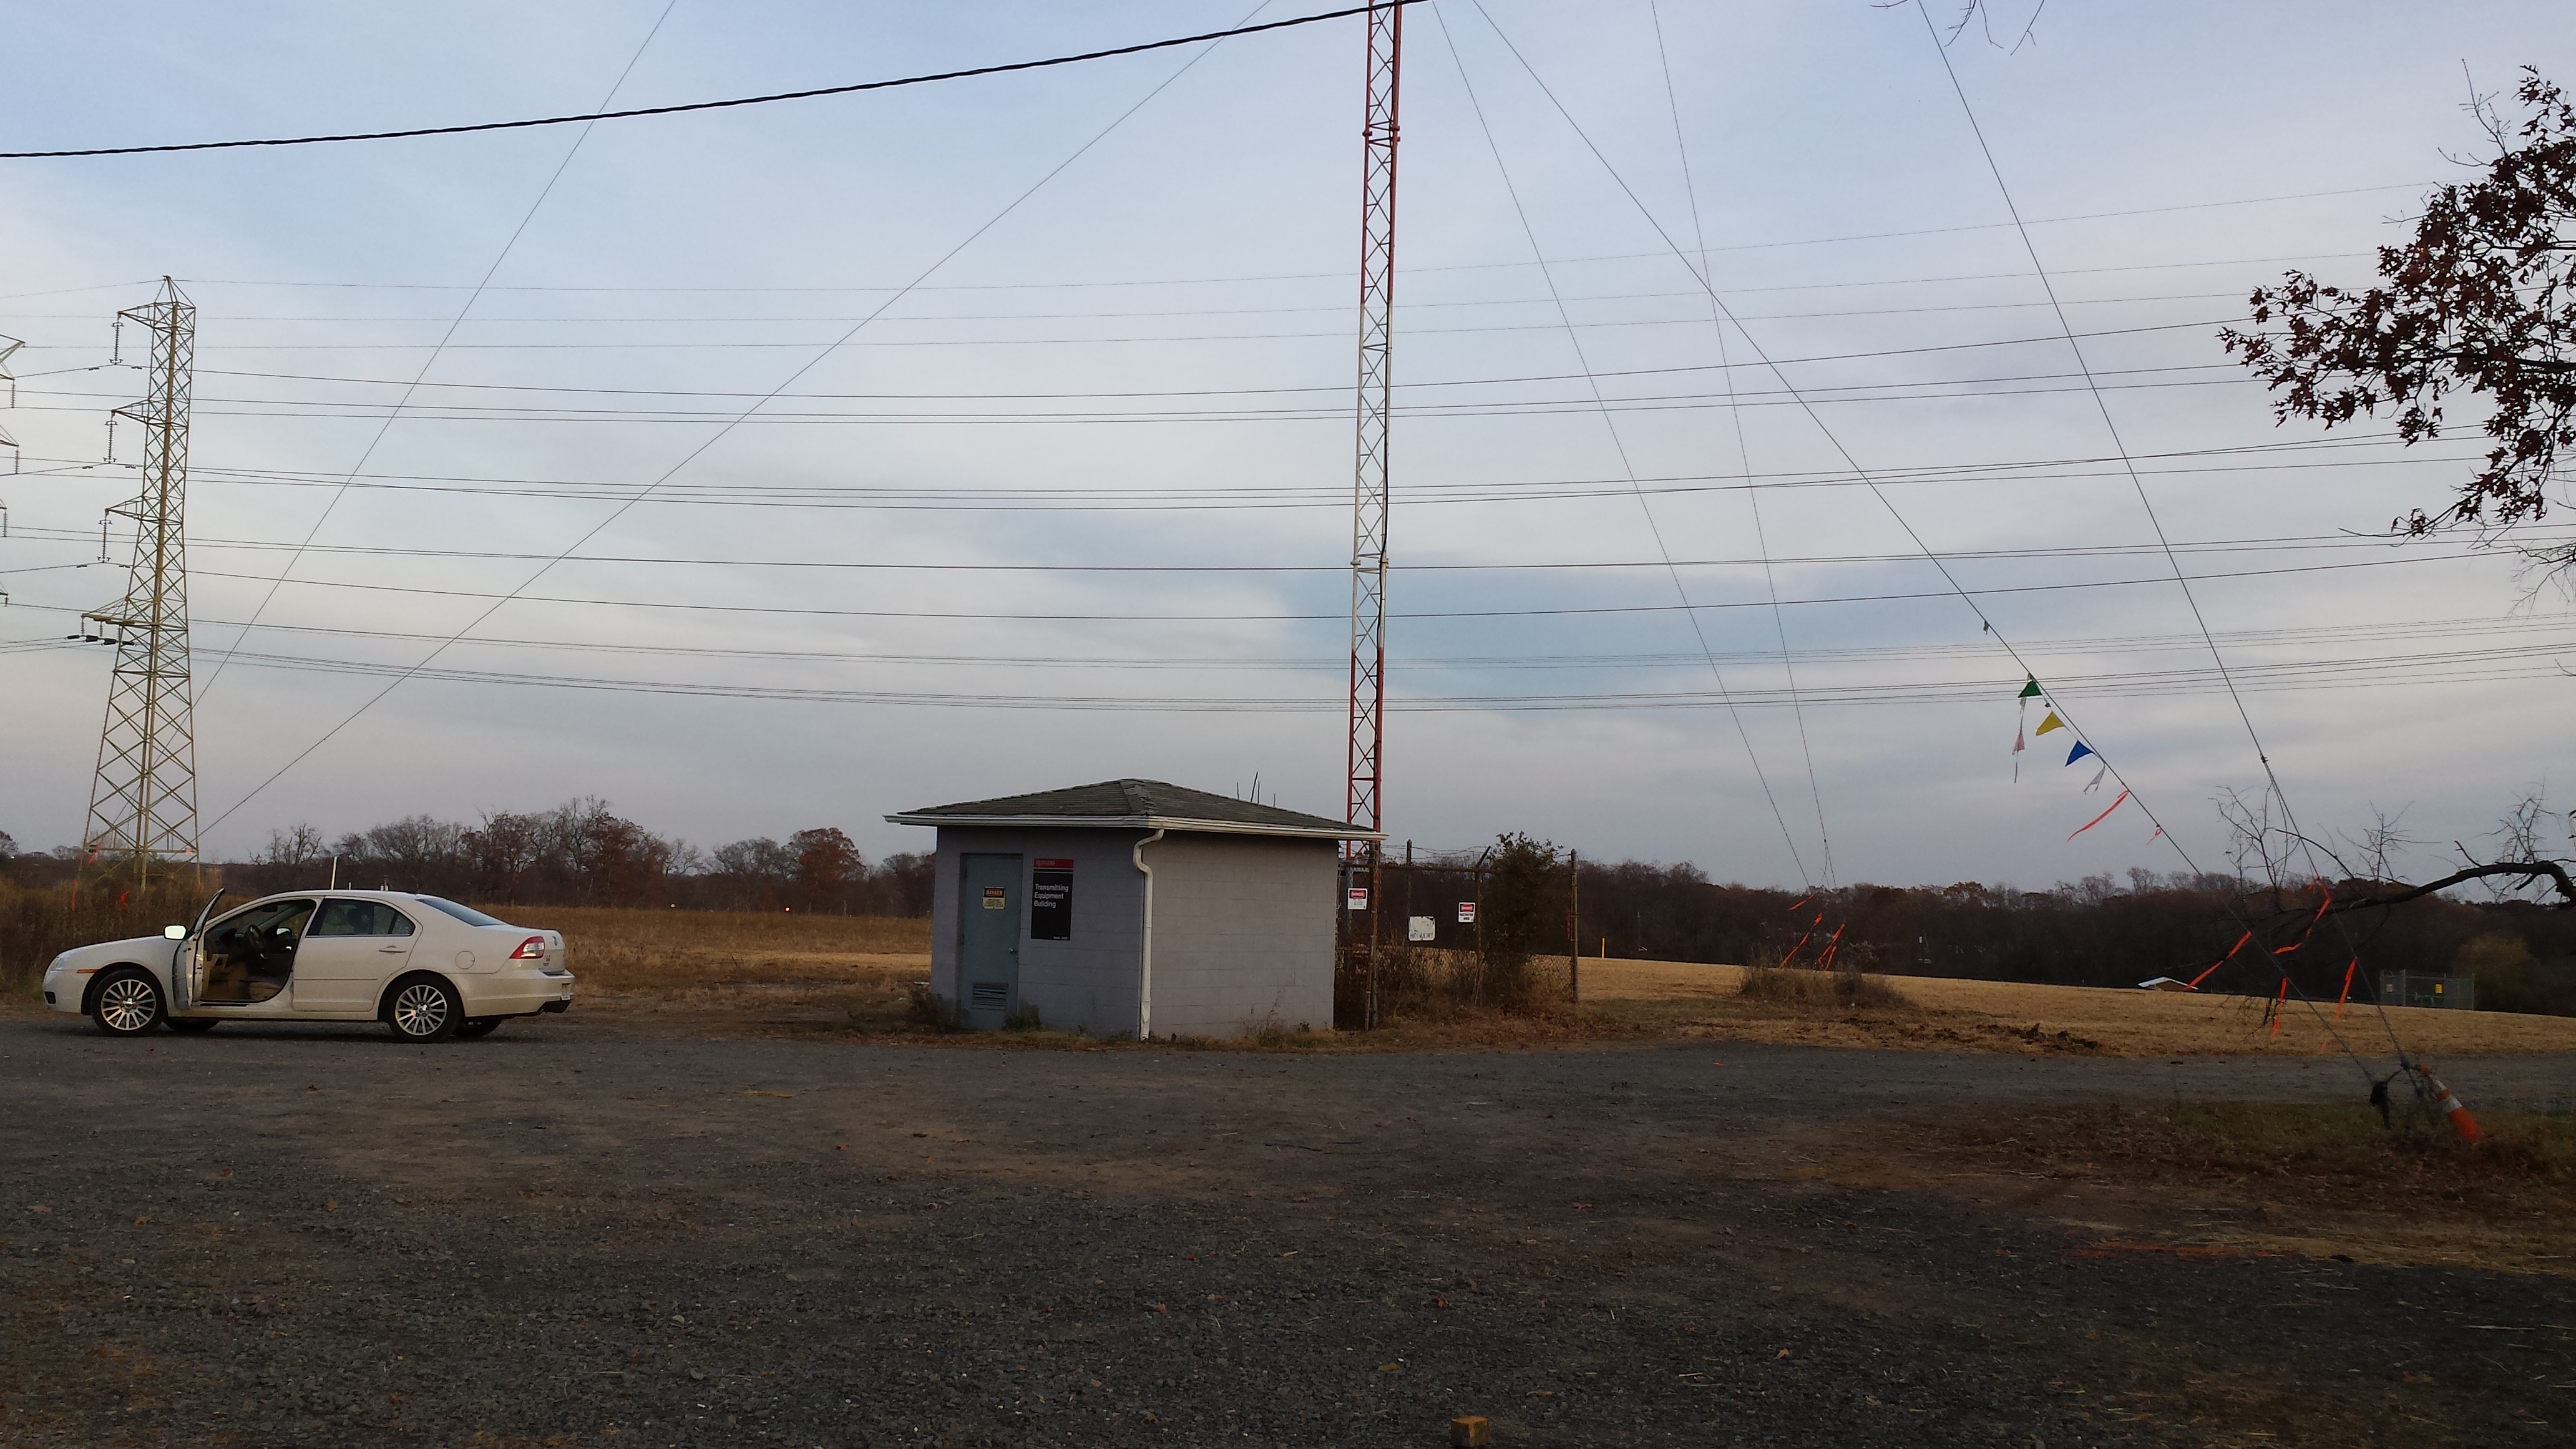 2014 - The Transmitter Building